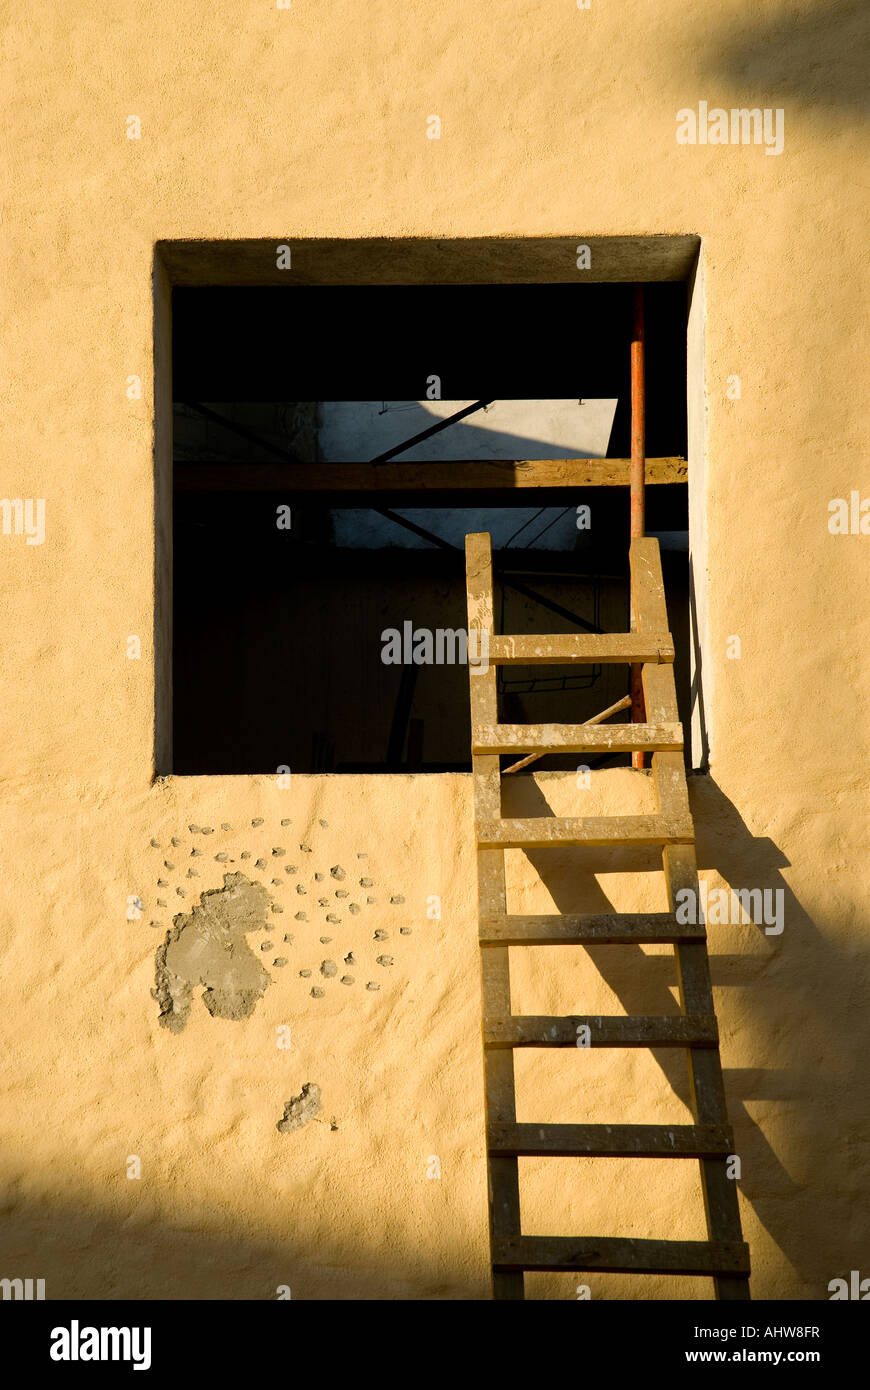 A colorful aged Mexican plaster window in twilight shadow with ladder ascending Stock Photo